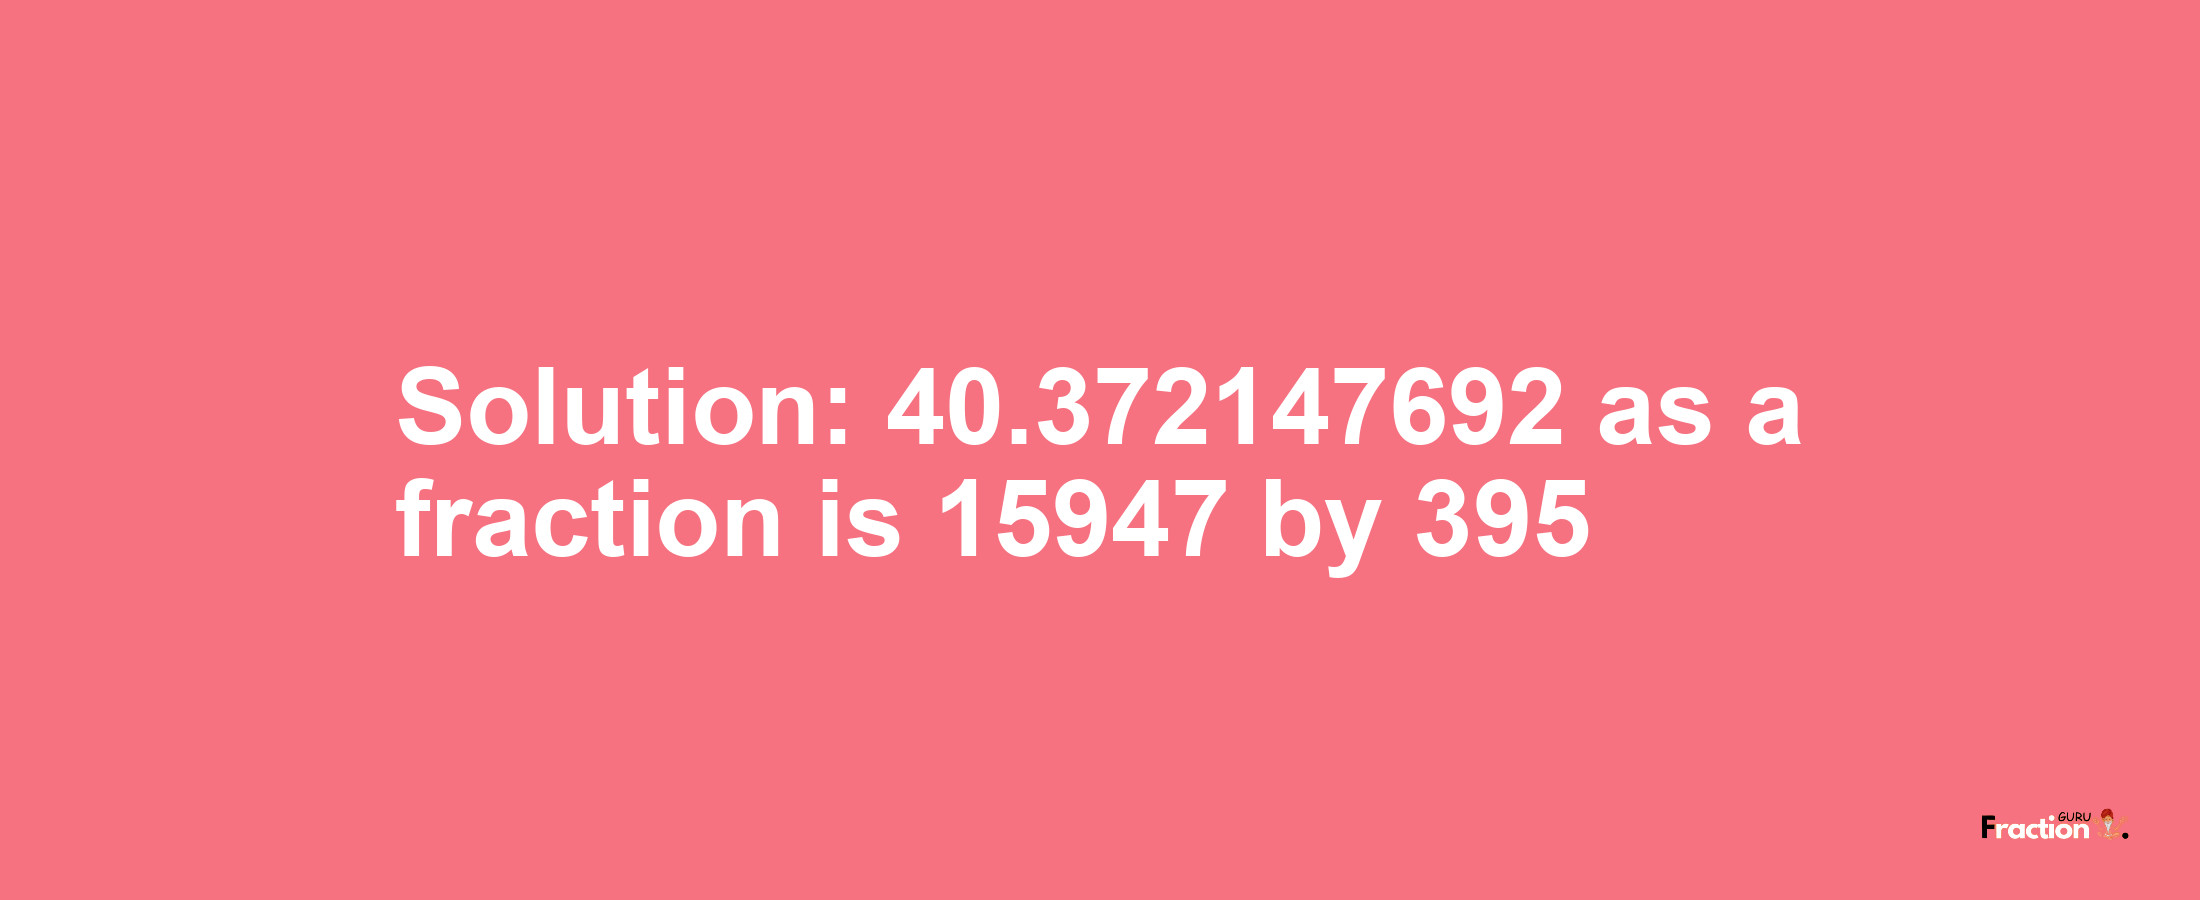 Solution:40.372147692 as a fraction is 15947/395